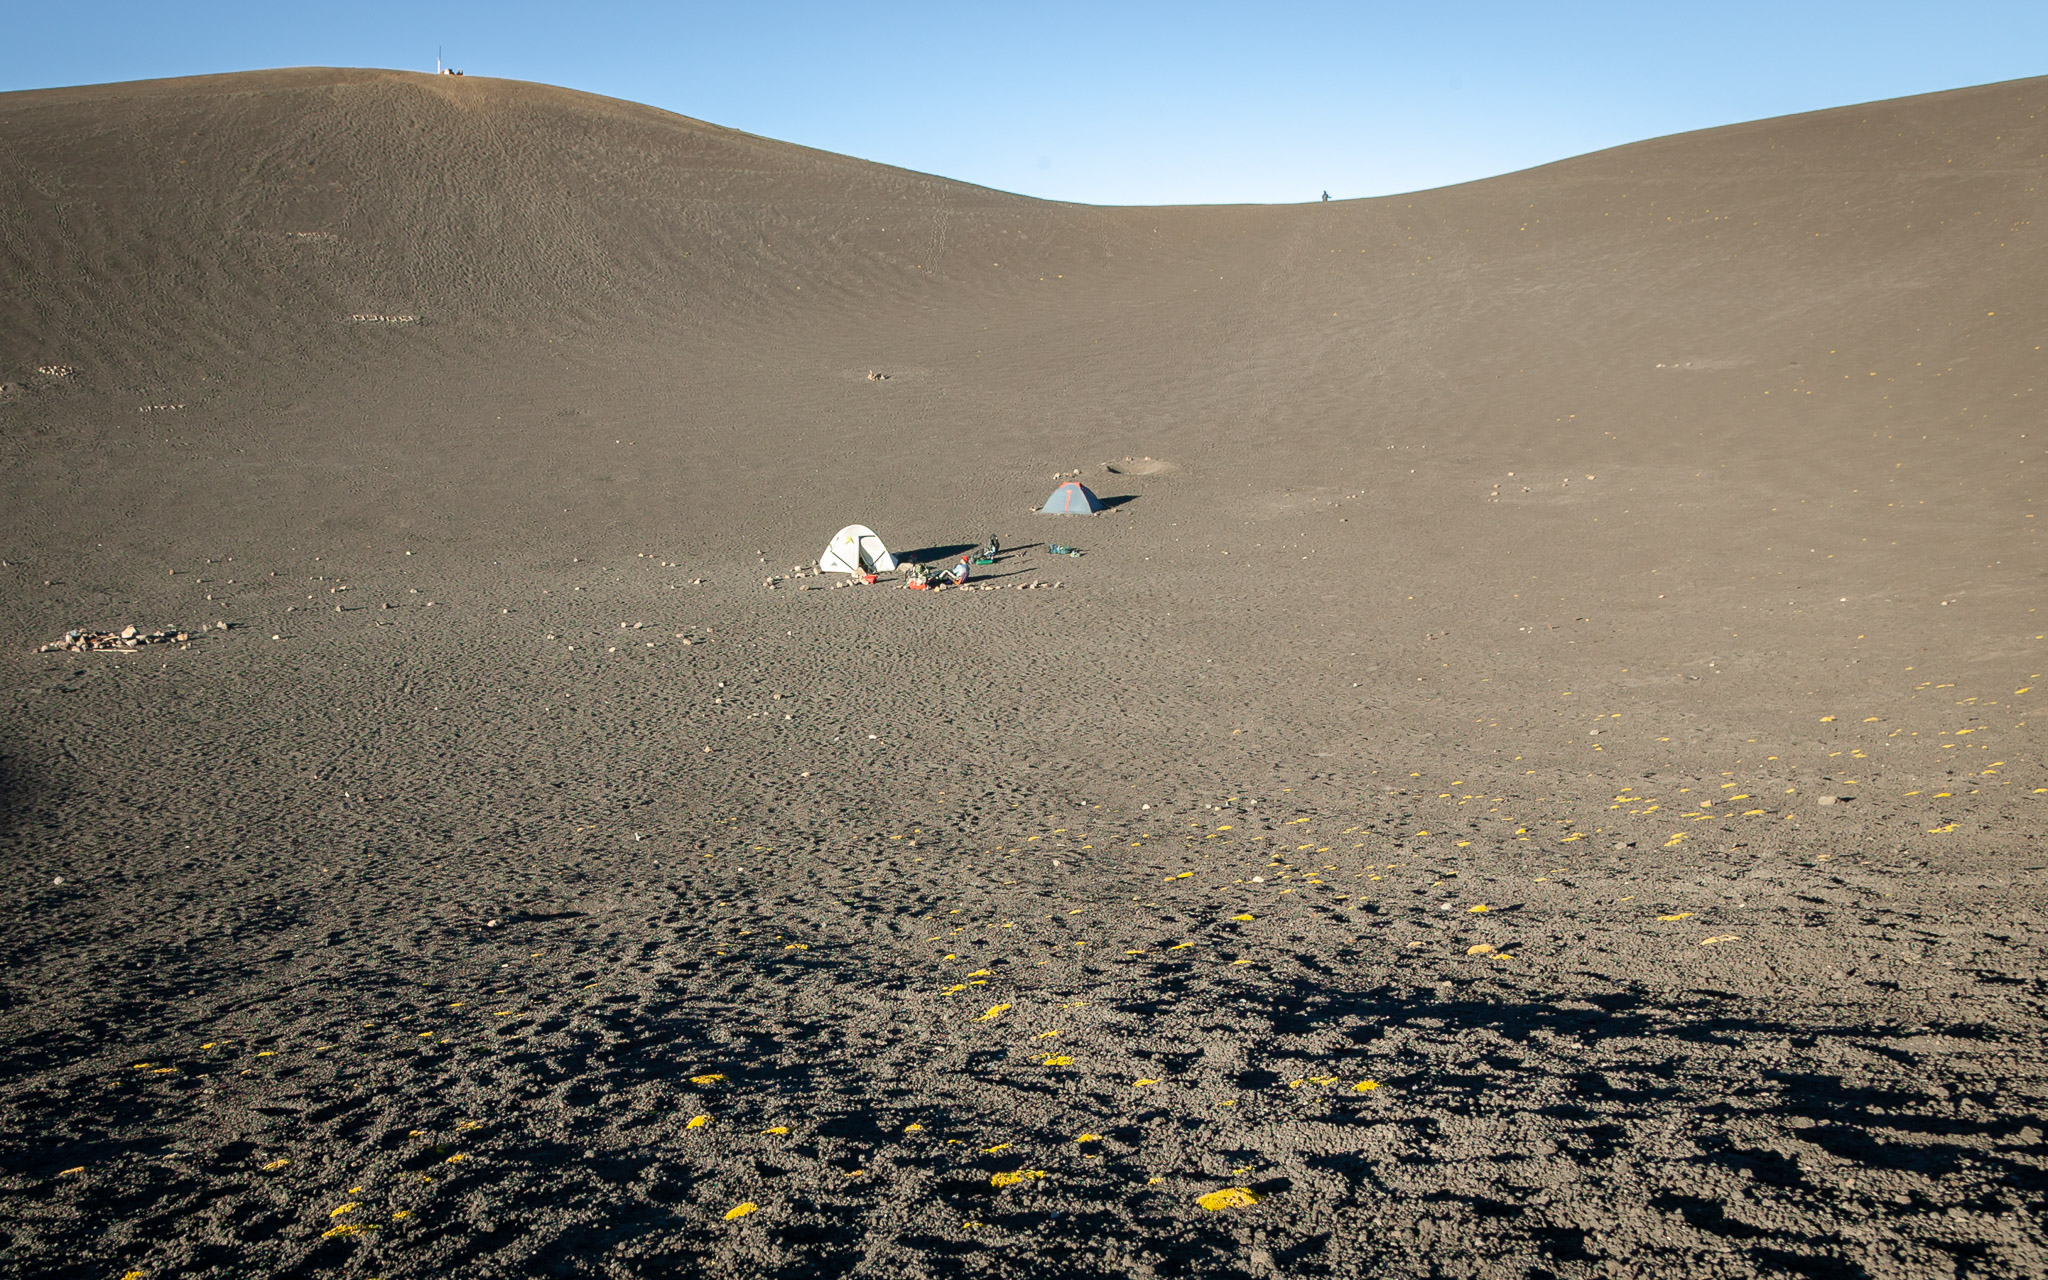 Camped in center of crater